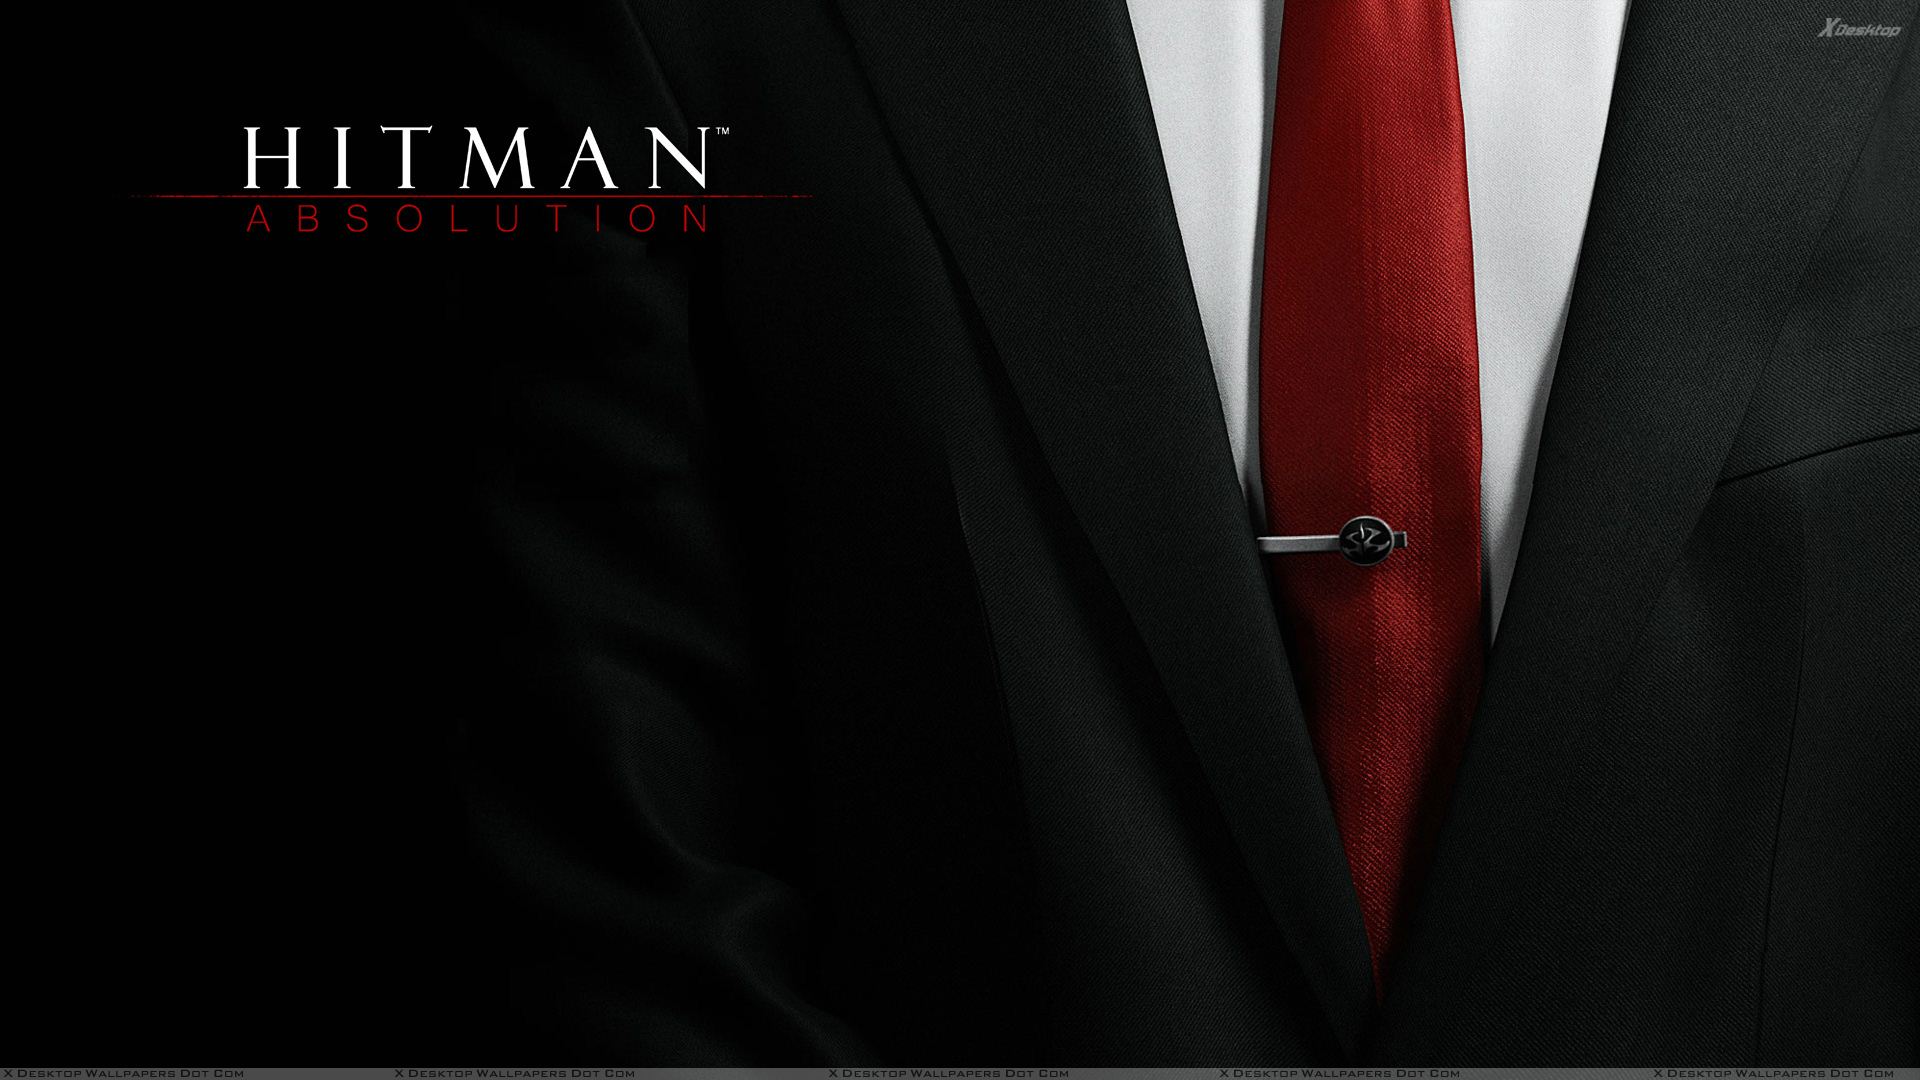 Hitman Absolution Wallpaper Photos Image In HD